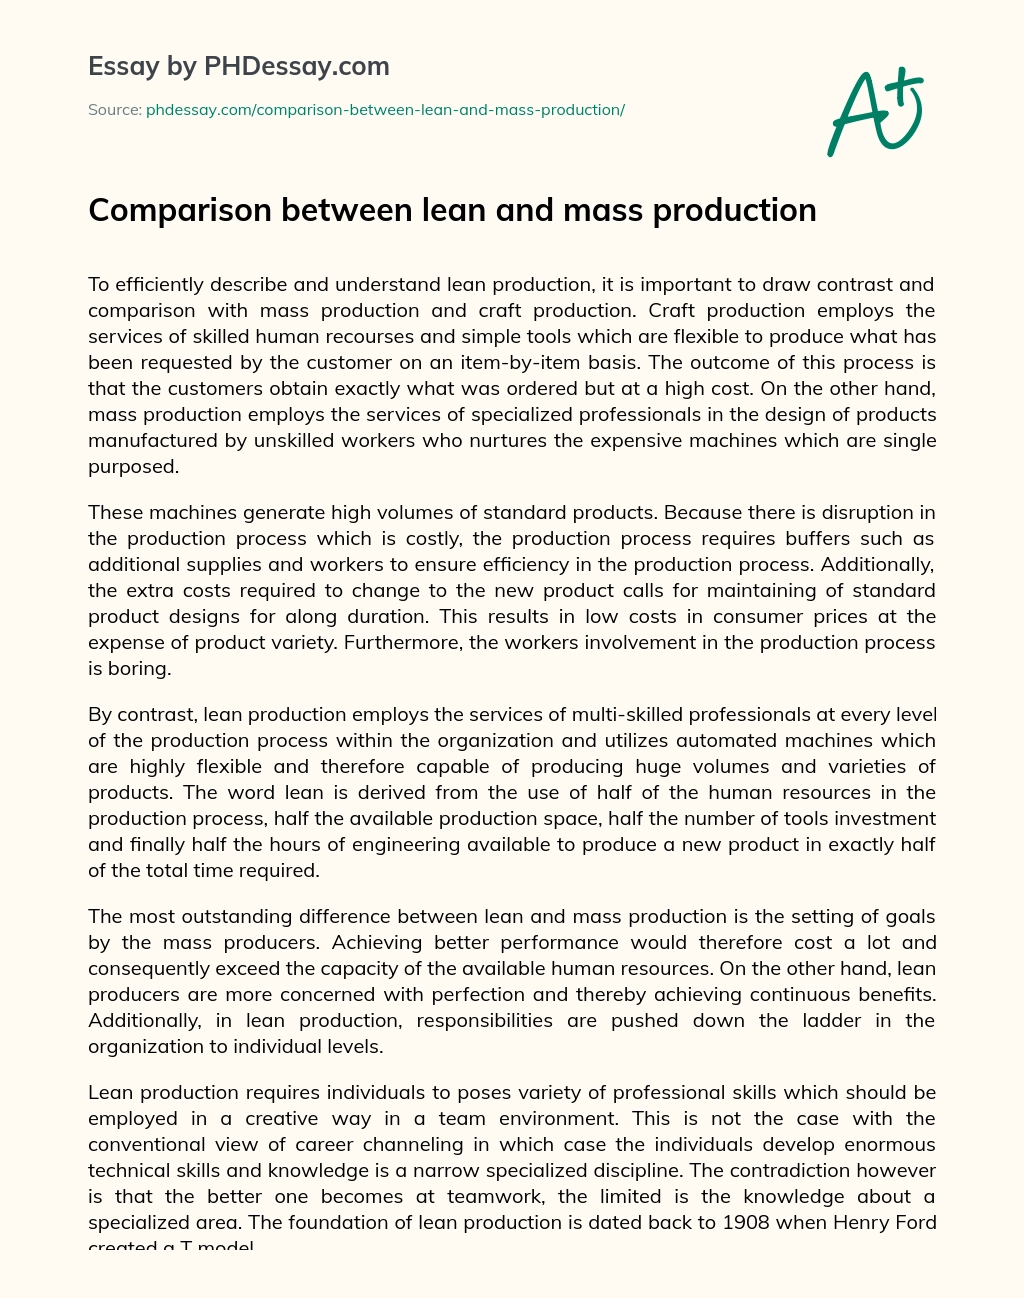 Comparison between lean and mass production essay